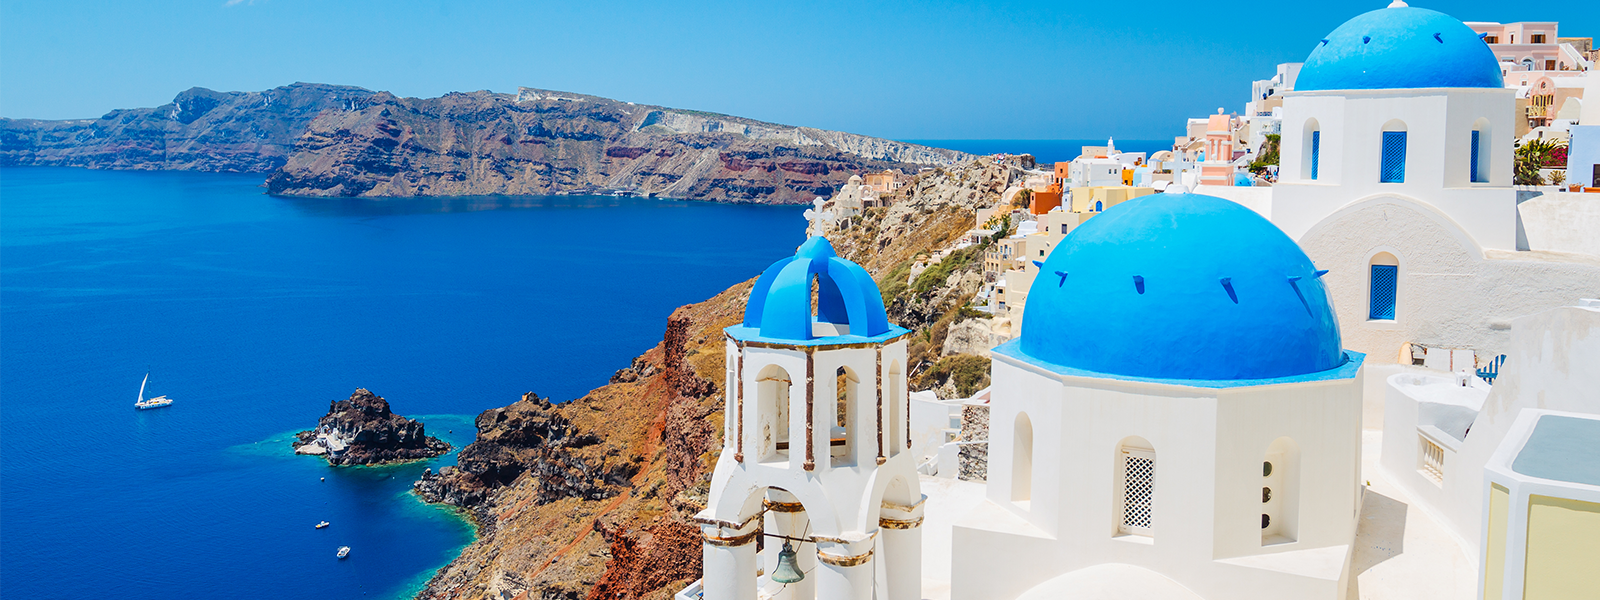 A Perfect Greece Vacation Package 2020-2021: Mykonos, Santorini, & More